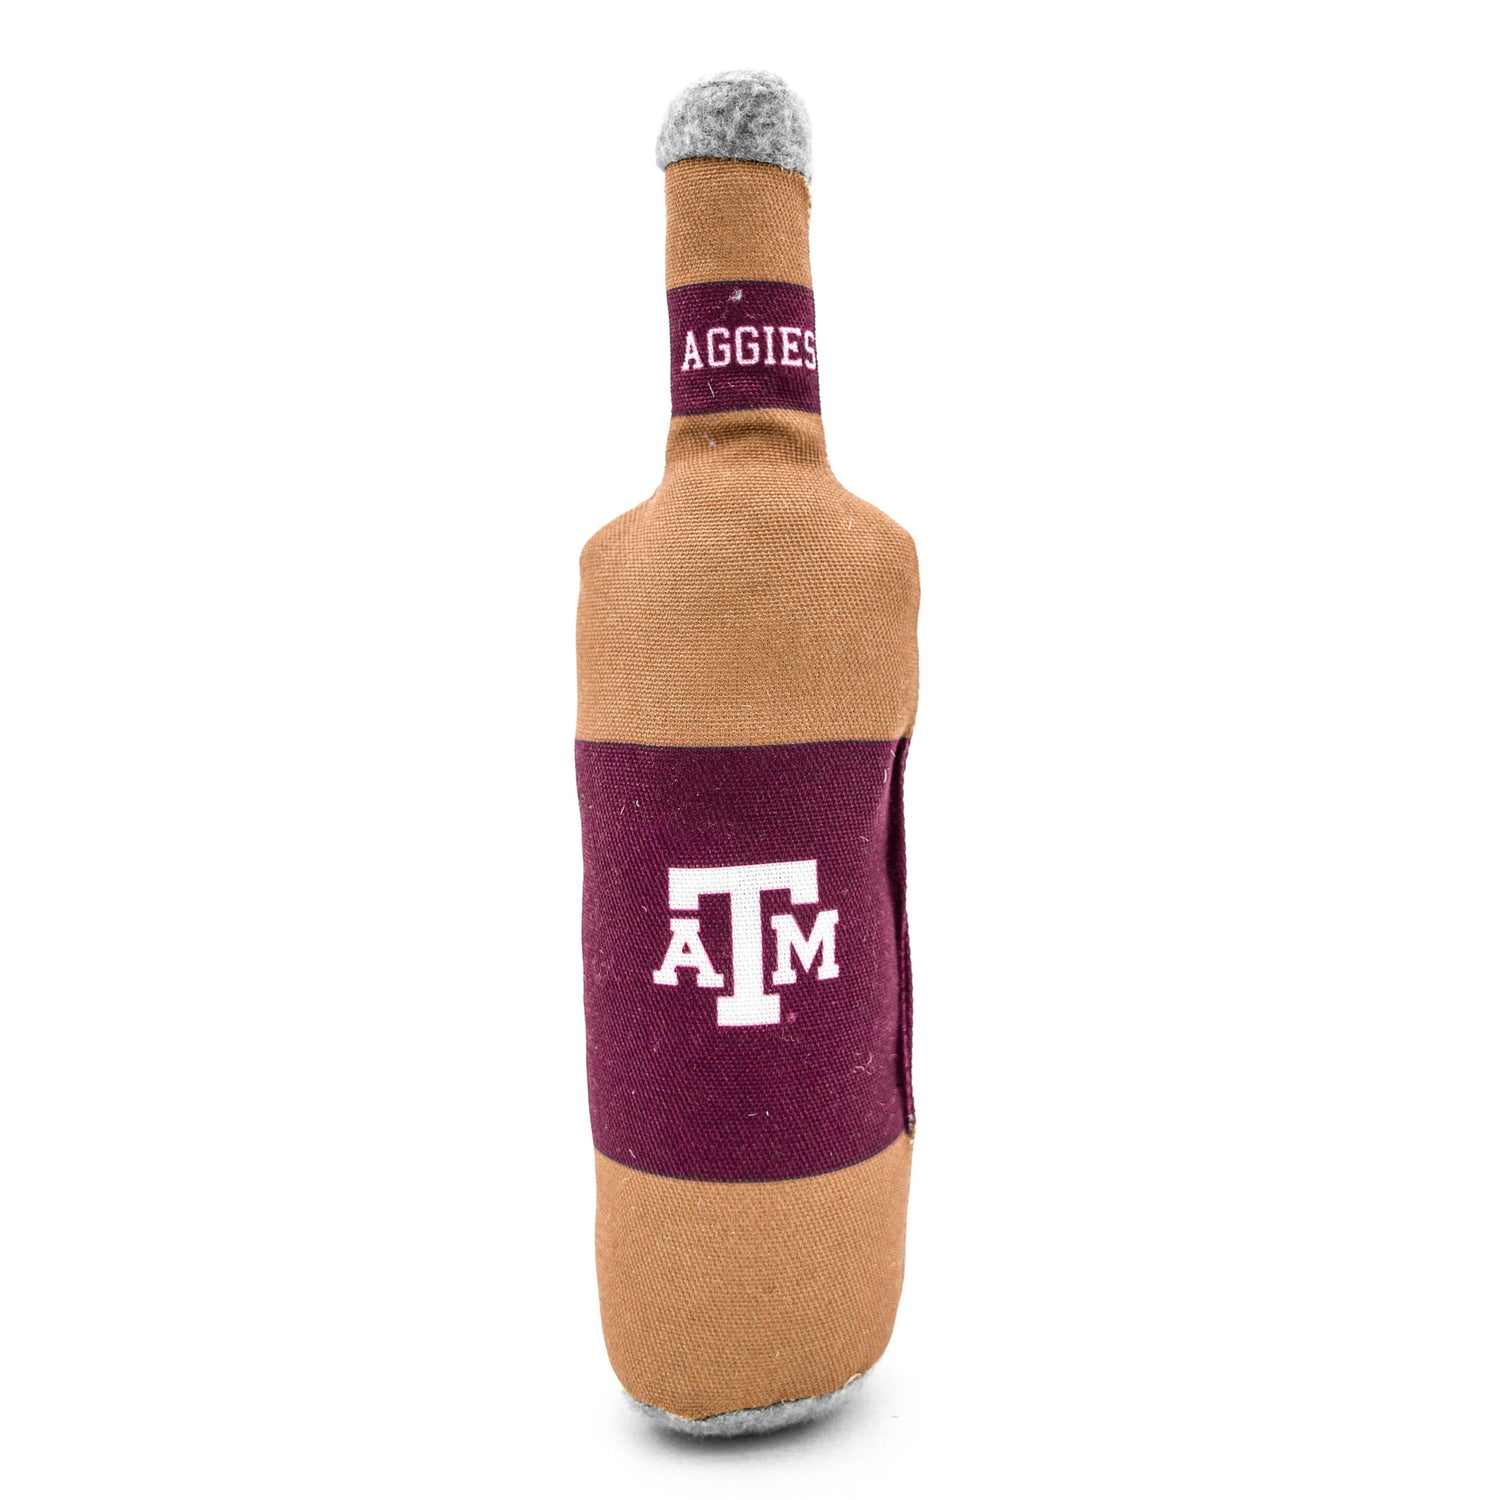 Texas A&M Aggies Squeaky Bottle Dog Toy